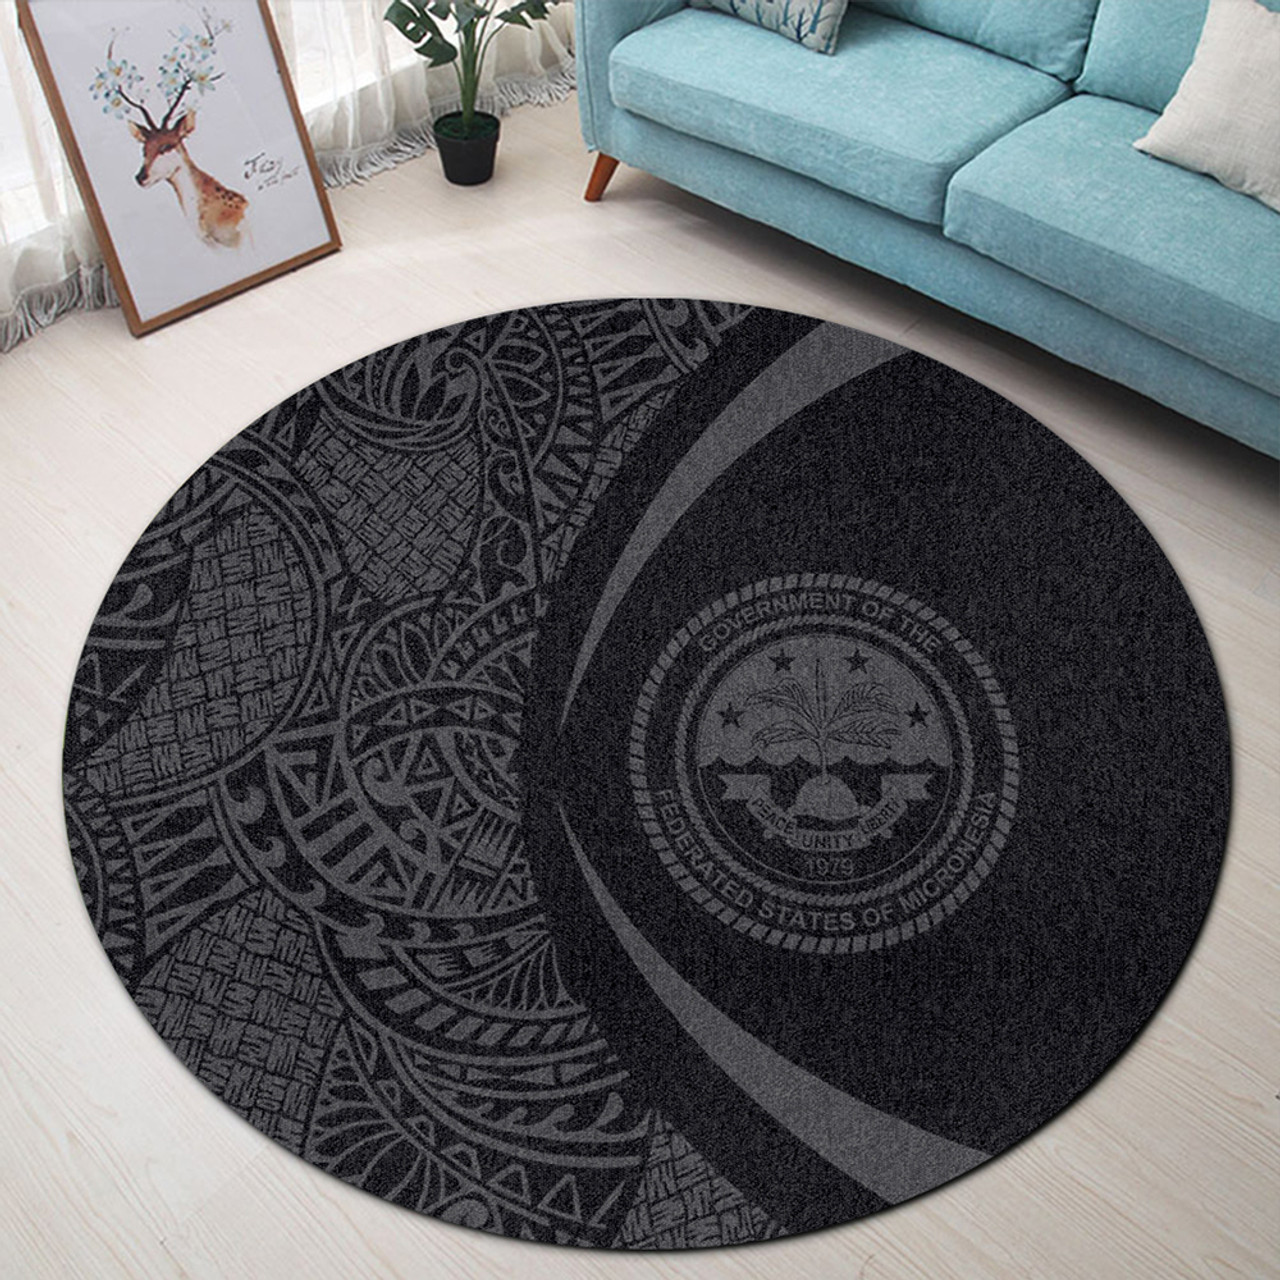 Federated States Of Micronesia Round Rug Lauhala Gray Circle Style